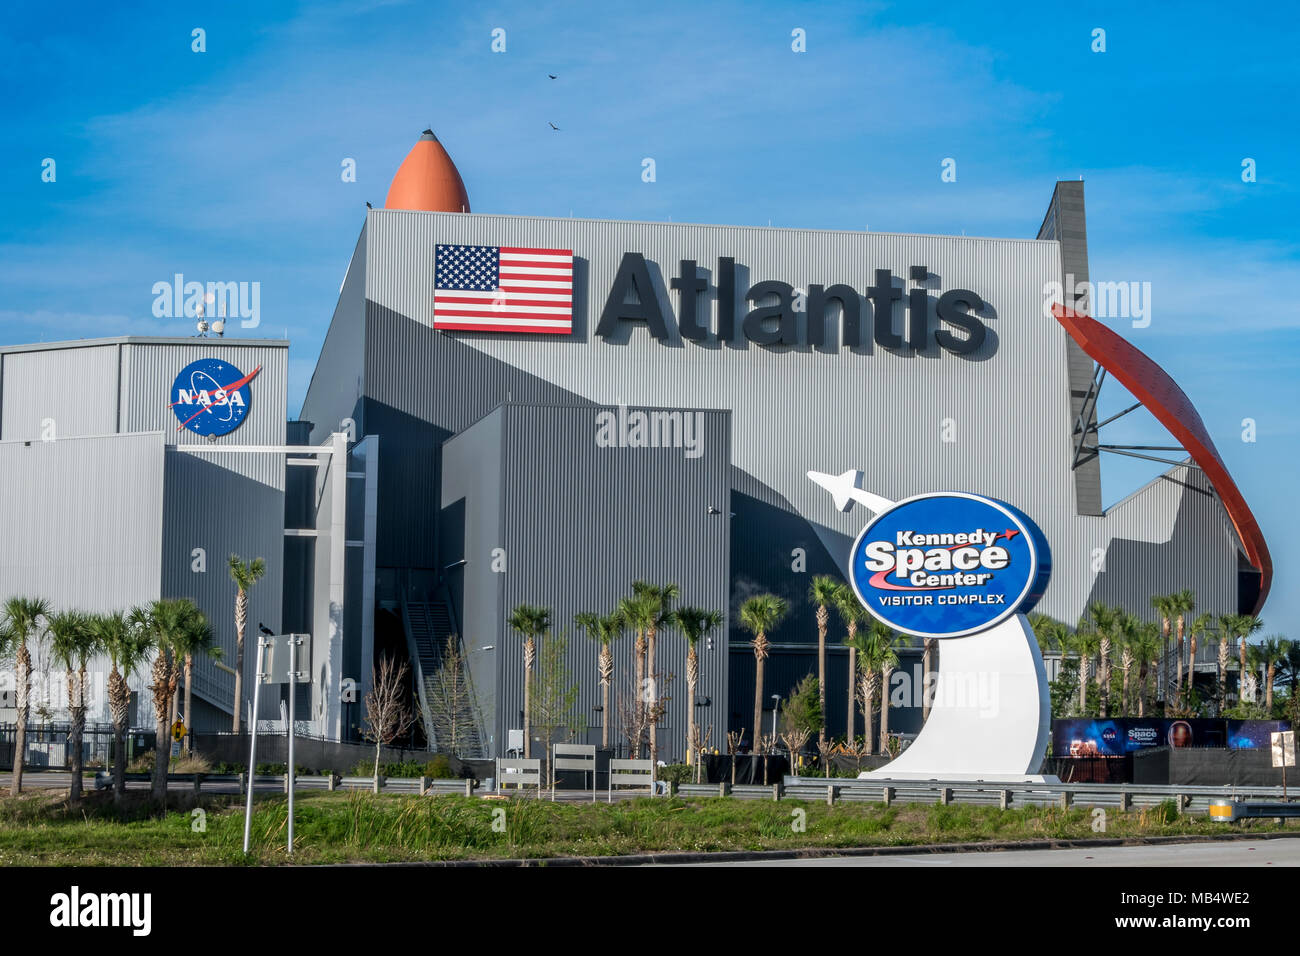 Cape Canaveral, Florida, USA - March 30, 2018: Kennedy Space Center Visitors Complex offers tours, exhibits, and historical displays. Stock Photo